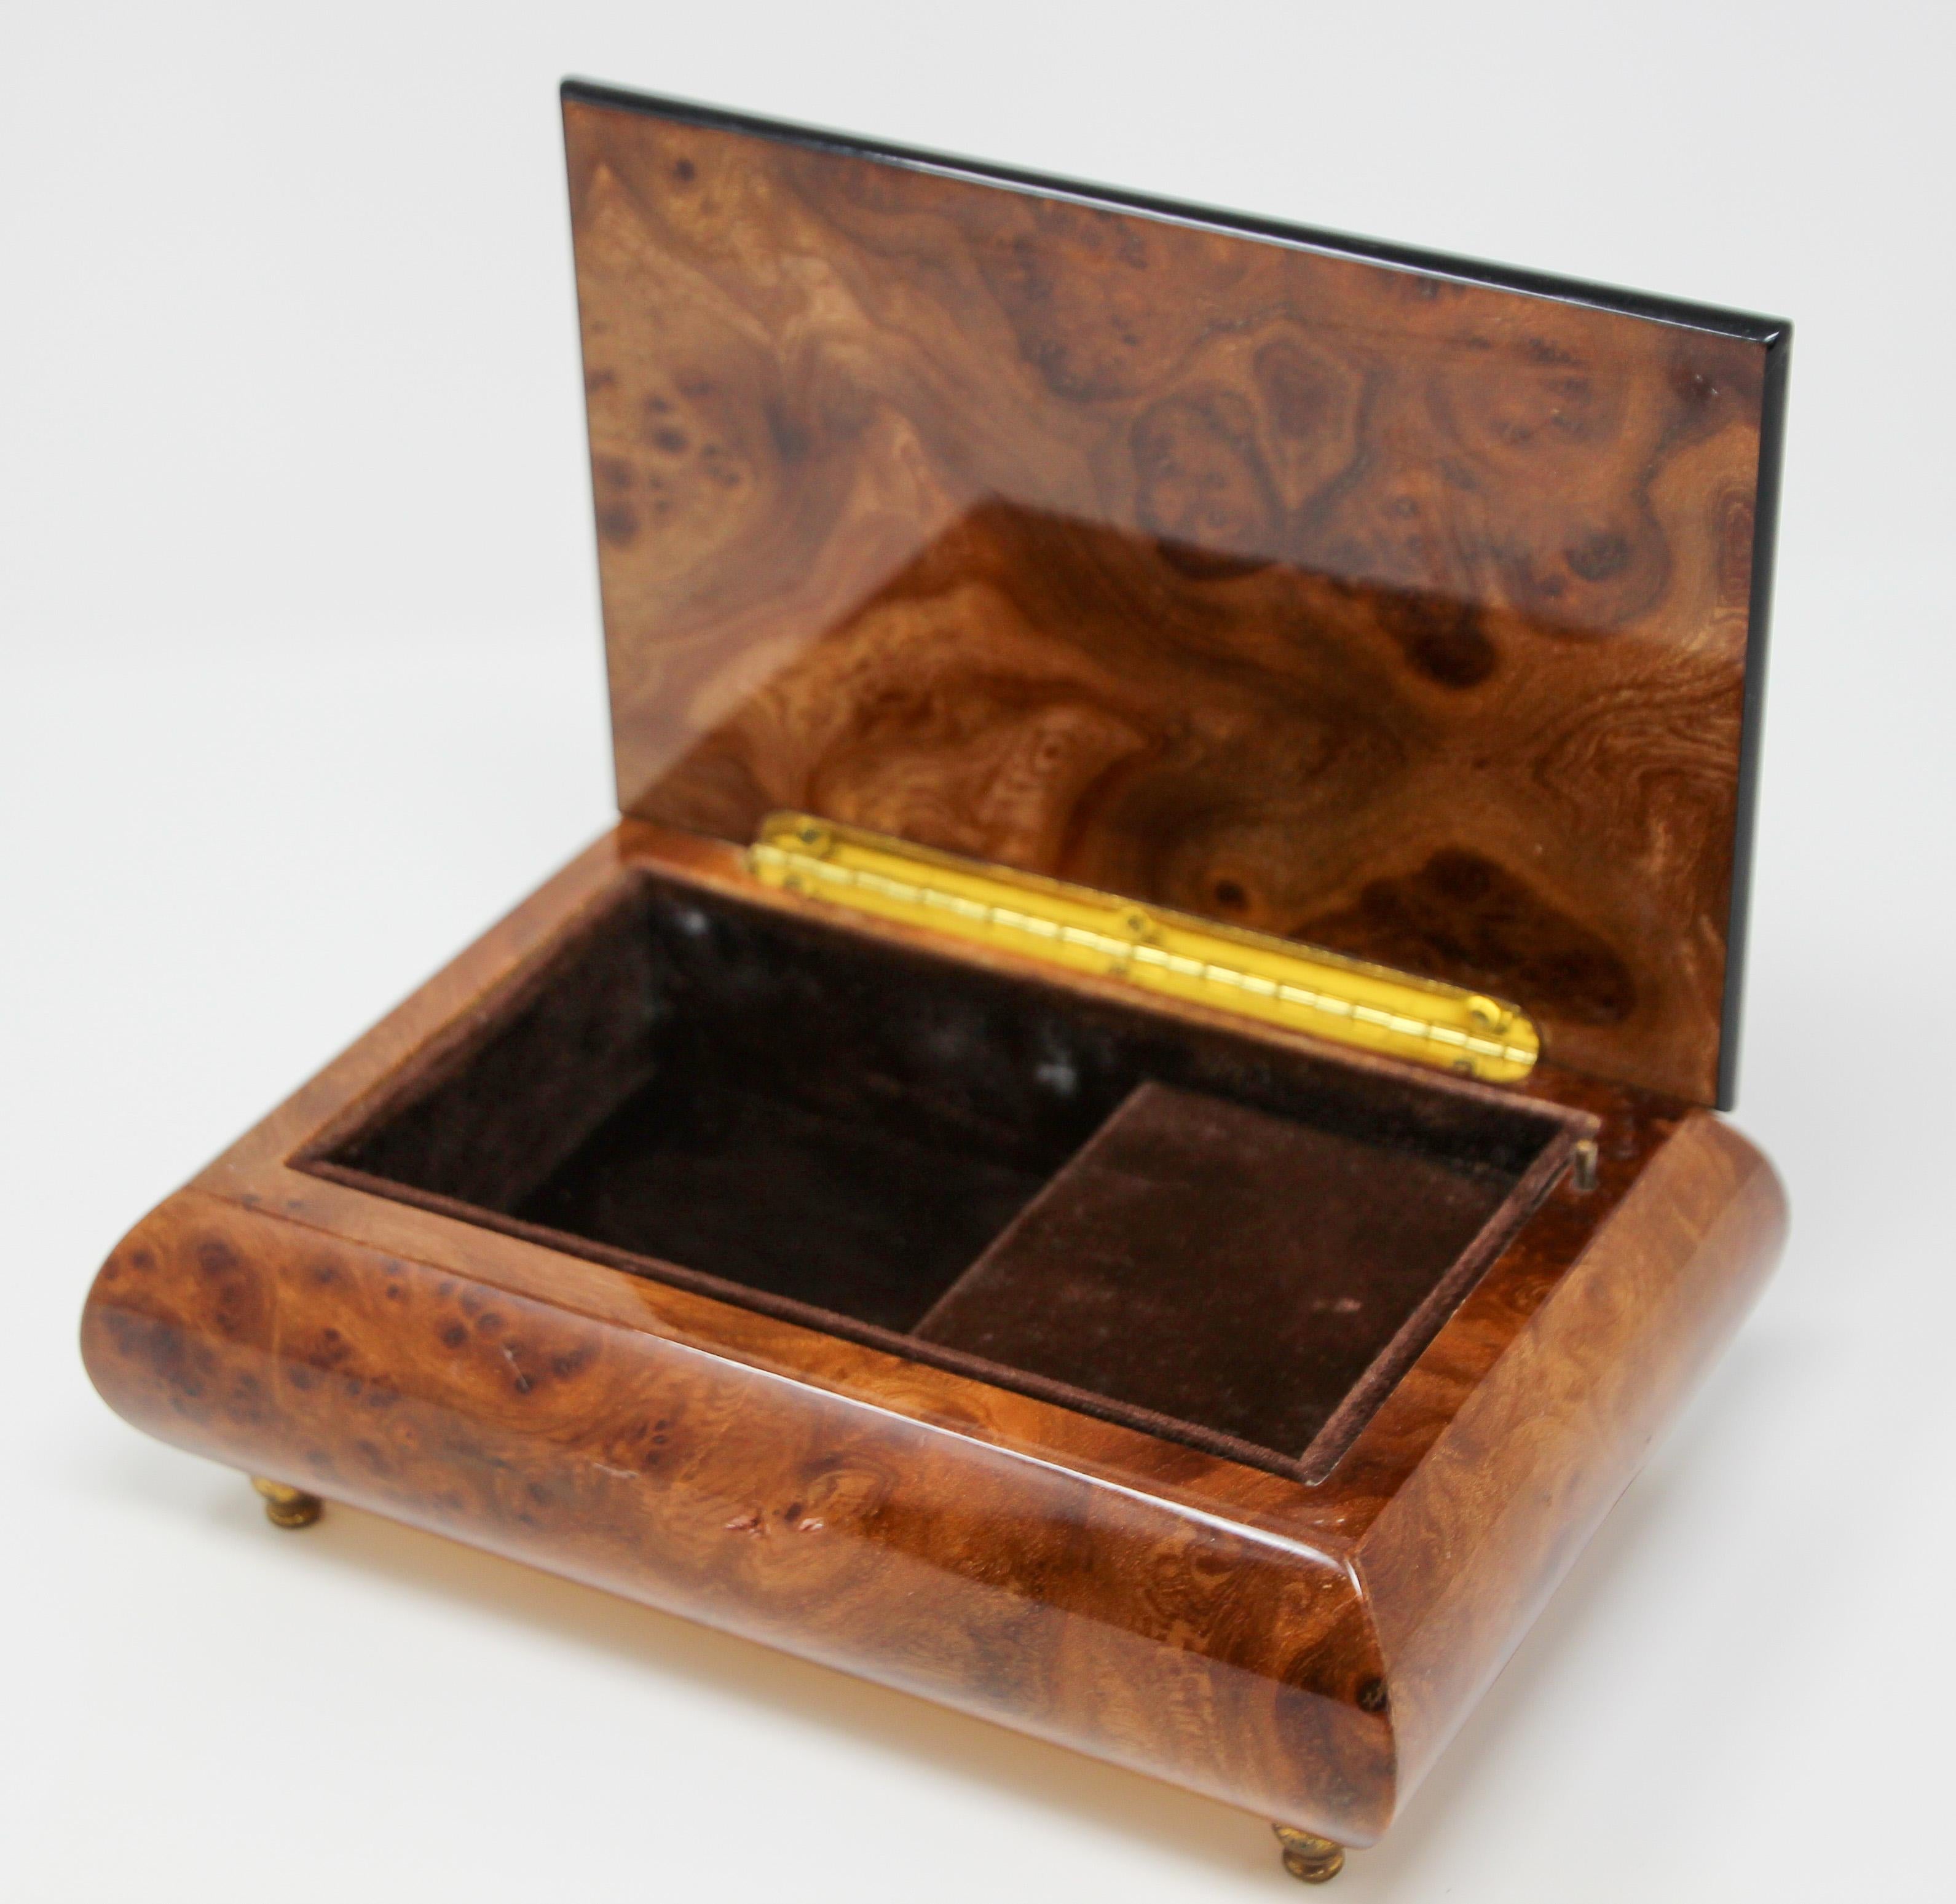 Elegant footed wooden music box in thuya wood.
Thuya tree is famous for rich gold and brown shades of its grain and unique exotic fragrance, similar to cedar.
Upon opening, the music box begins to play 